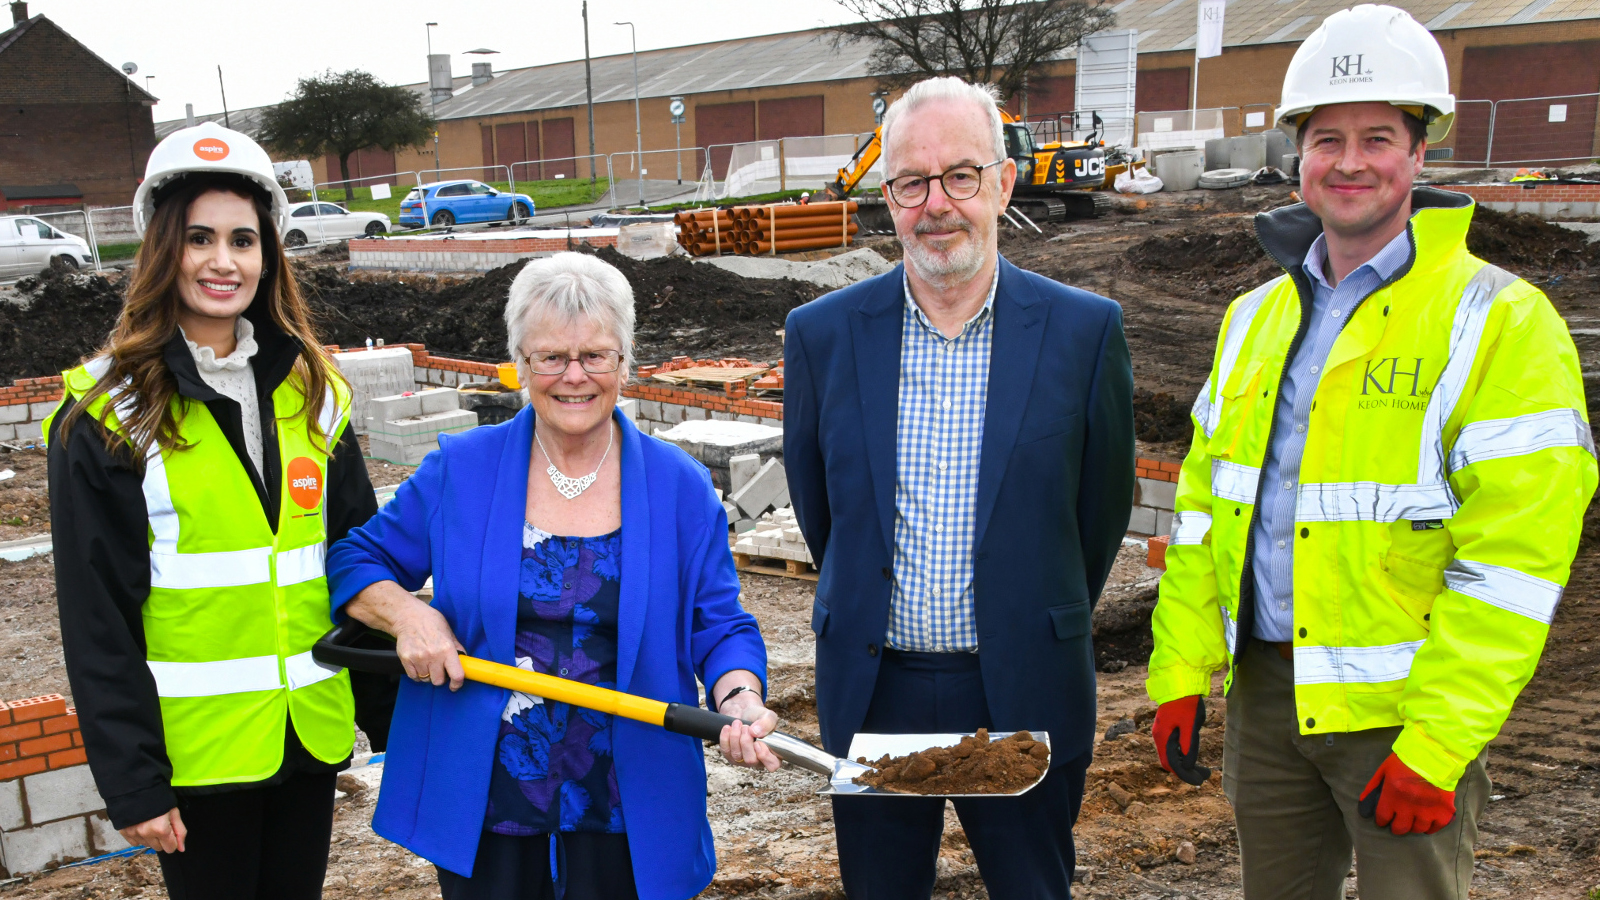 Farmeda Kosar (Director of Development & Regeneration, Aspire Housing, Lilian Barker (Chesterton One Stop Shop), Cllr Kenneth Owen (Mayor of Newcastle-underLyme, and Richard Williams (Managing Director, Keon Homes) pictured at the first phase of the Cross Street development